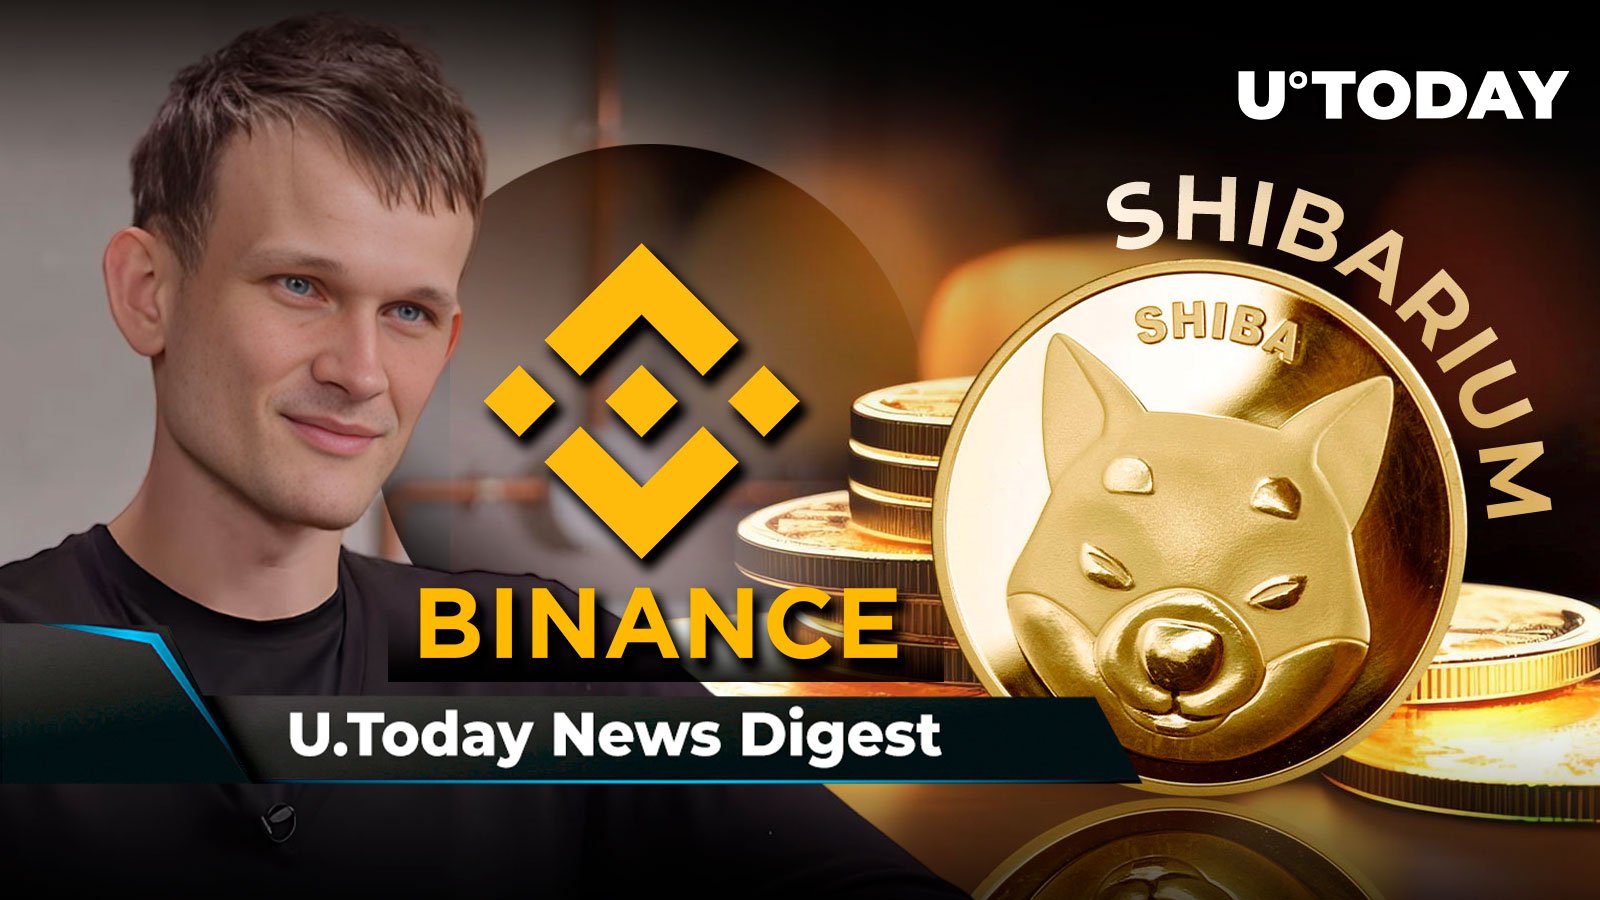 Ethereum’s Vitalik Buterin Makes Surprising Visit to Binance, SHIB Rep Shares Shibarium’s Plans to Onboard Thousands of Projects: Crypto News Digest by U.Today